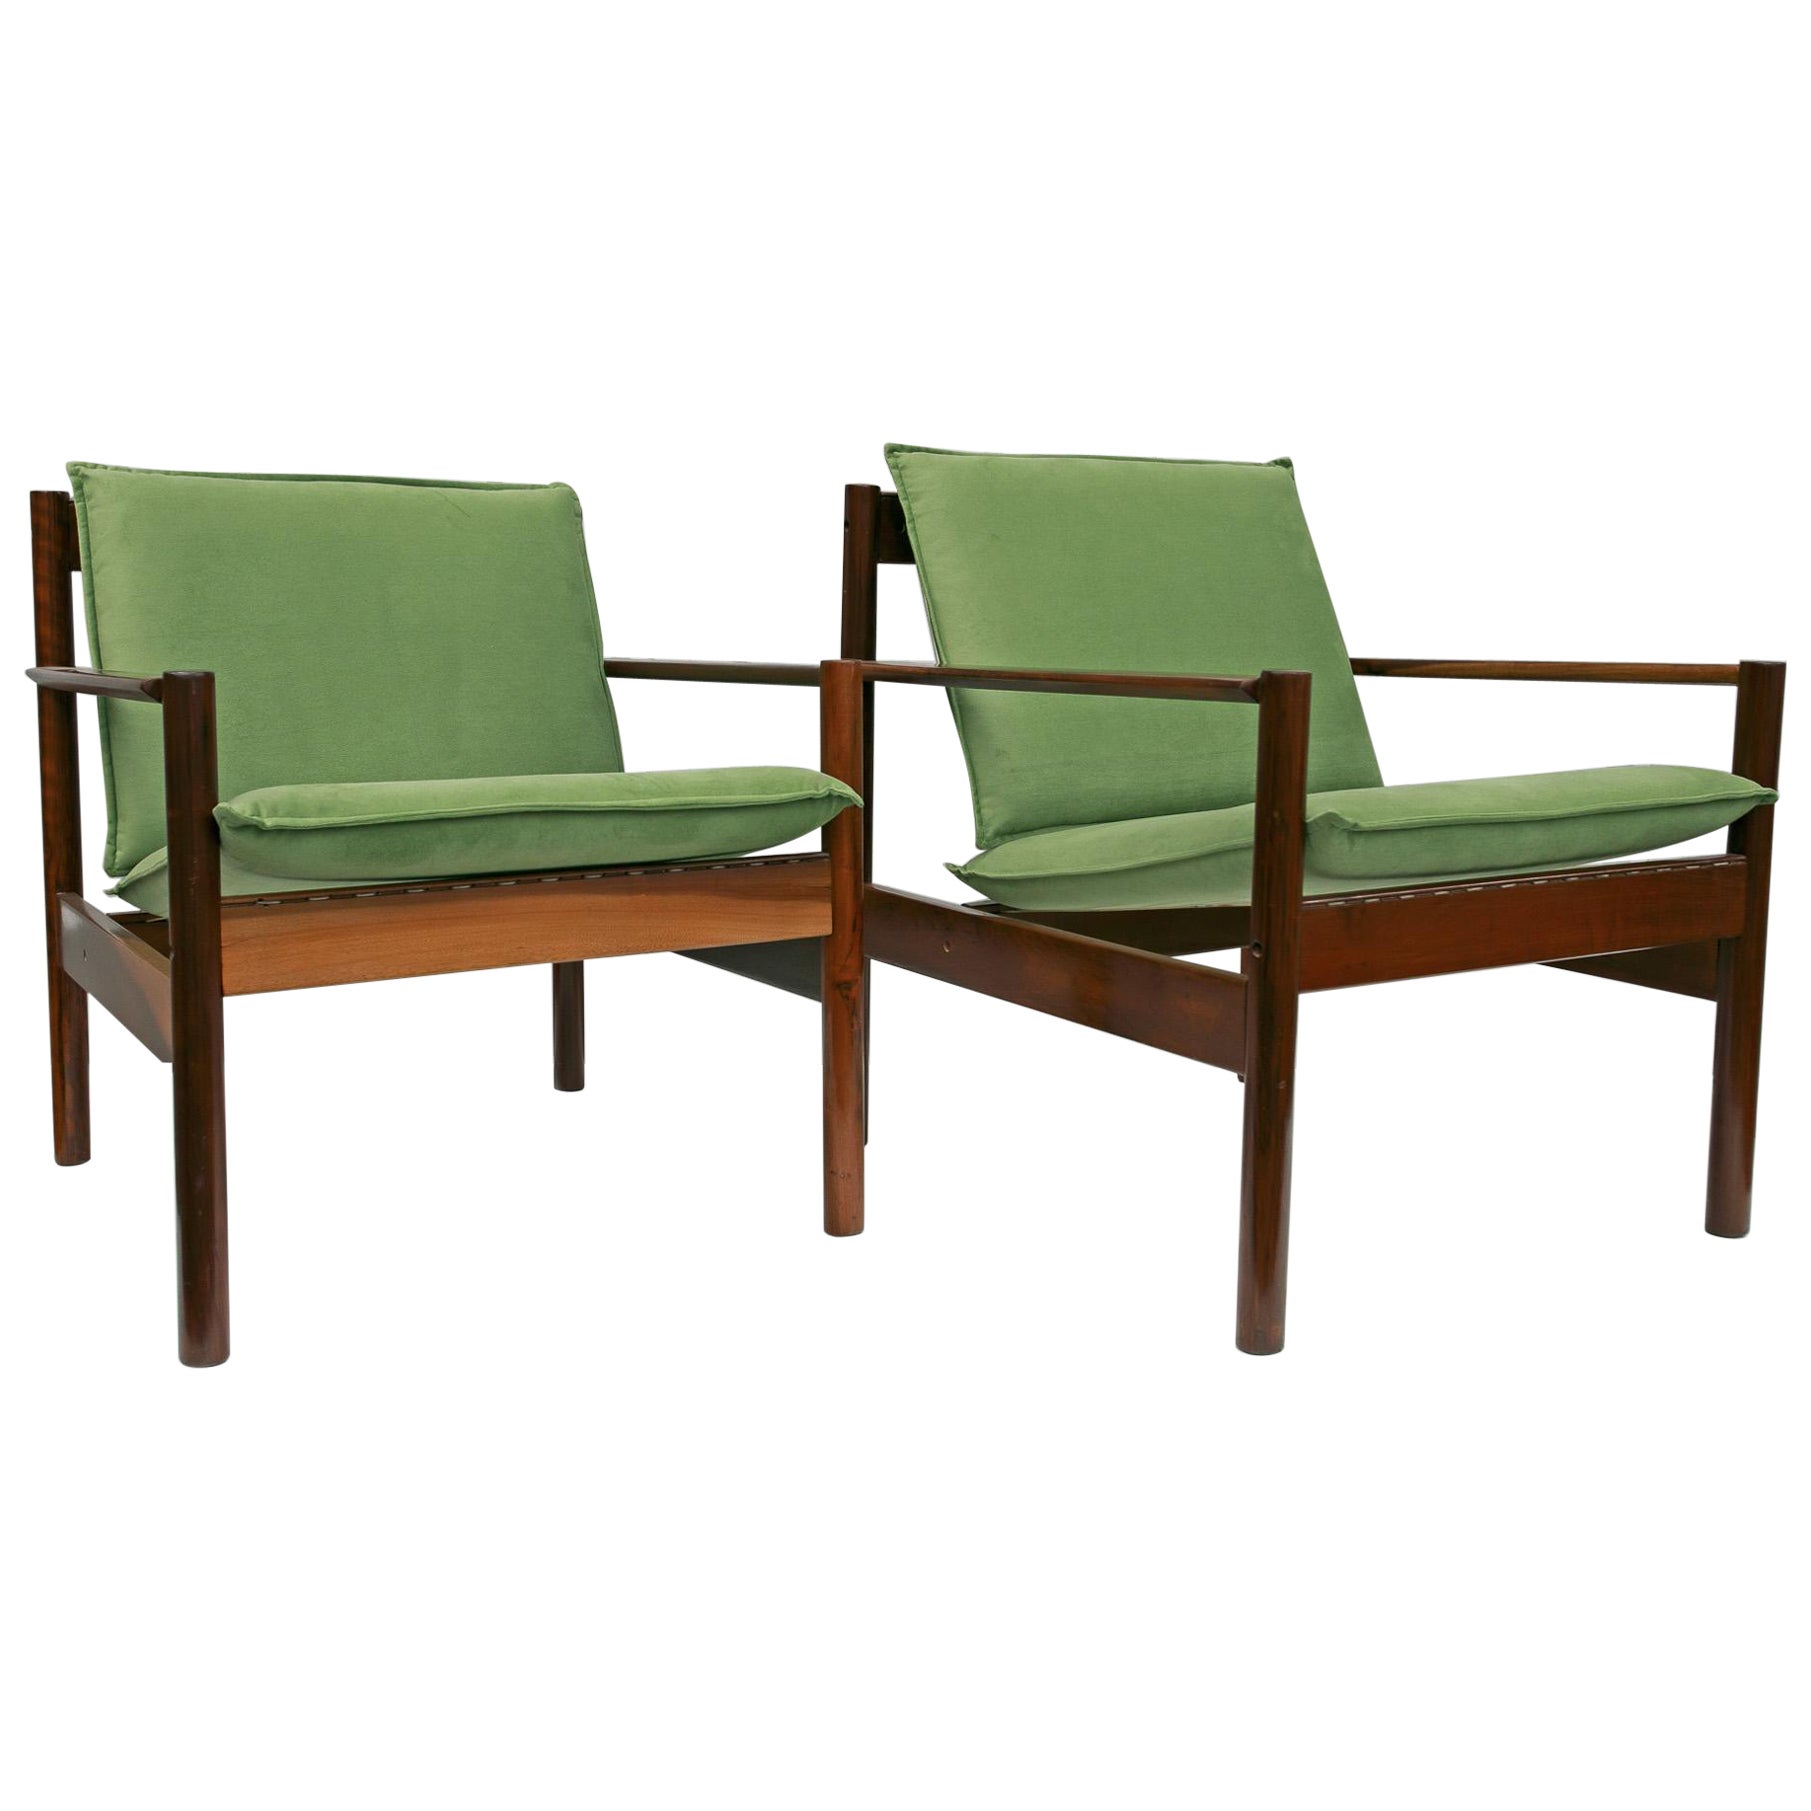 Brazilian Modern Armchairs in Hardwood & Fabric, Michel Arnoult, 1960s For Sale